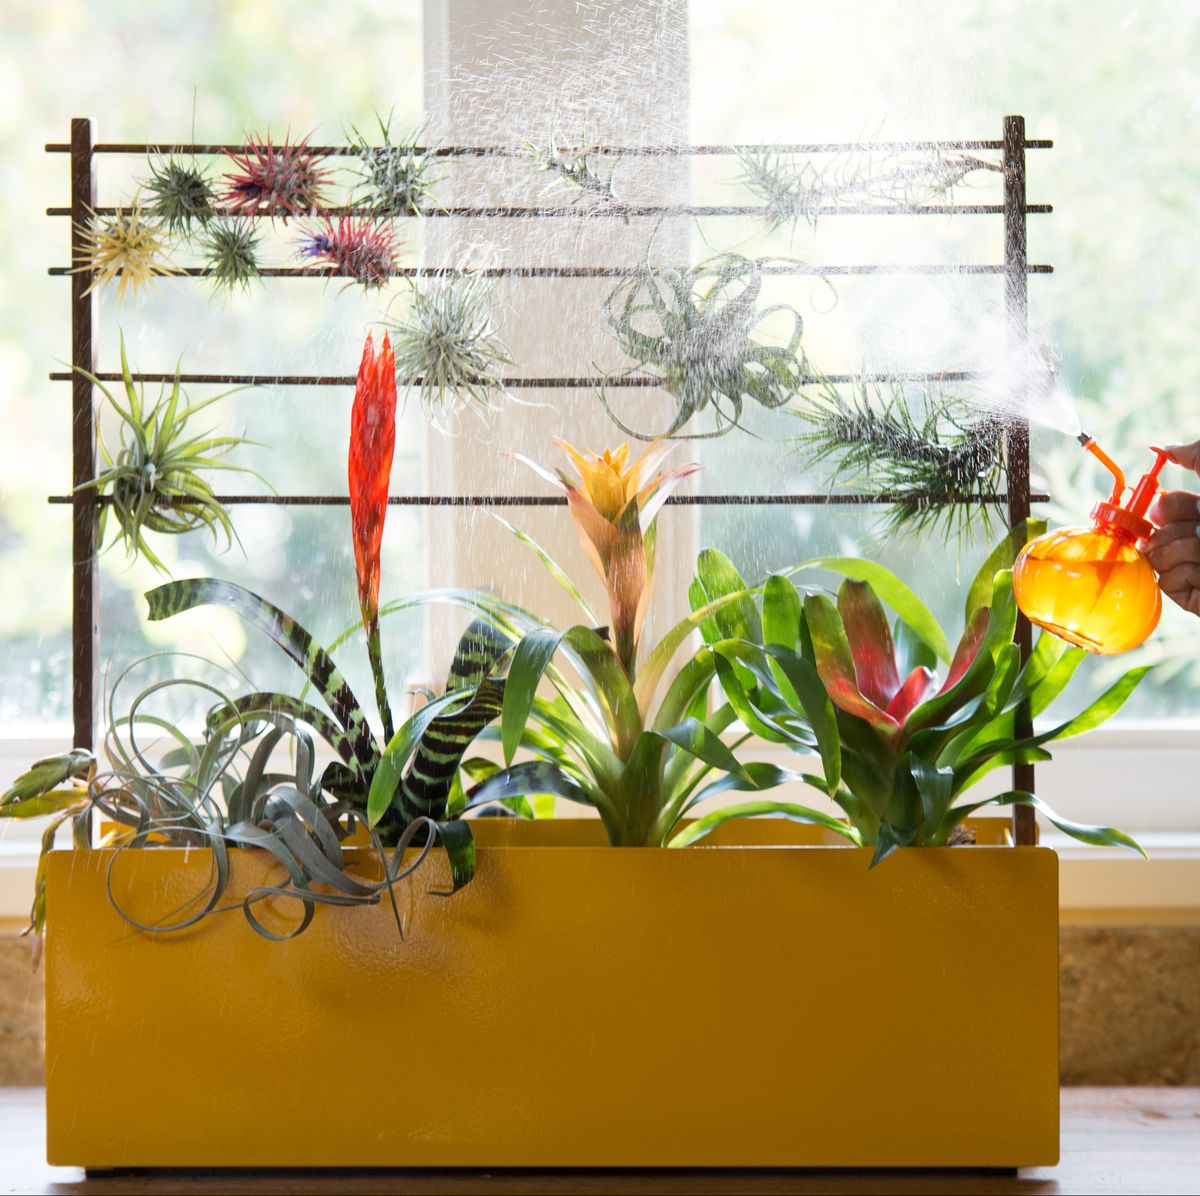 Plant Positivity: 8 Ways to Enrich Your Home With Plants